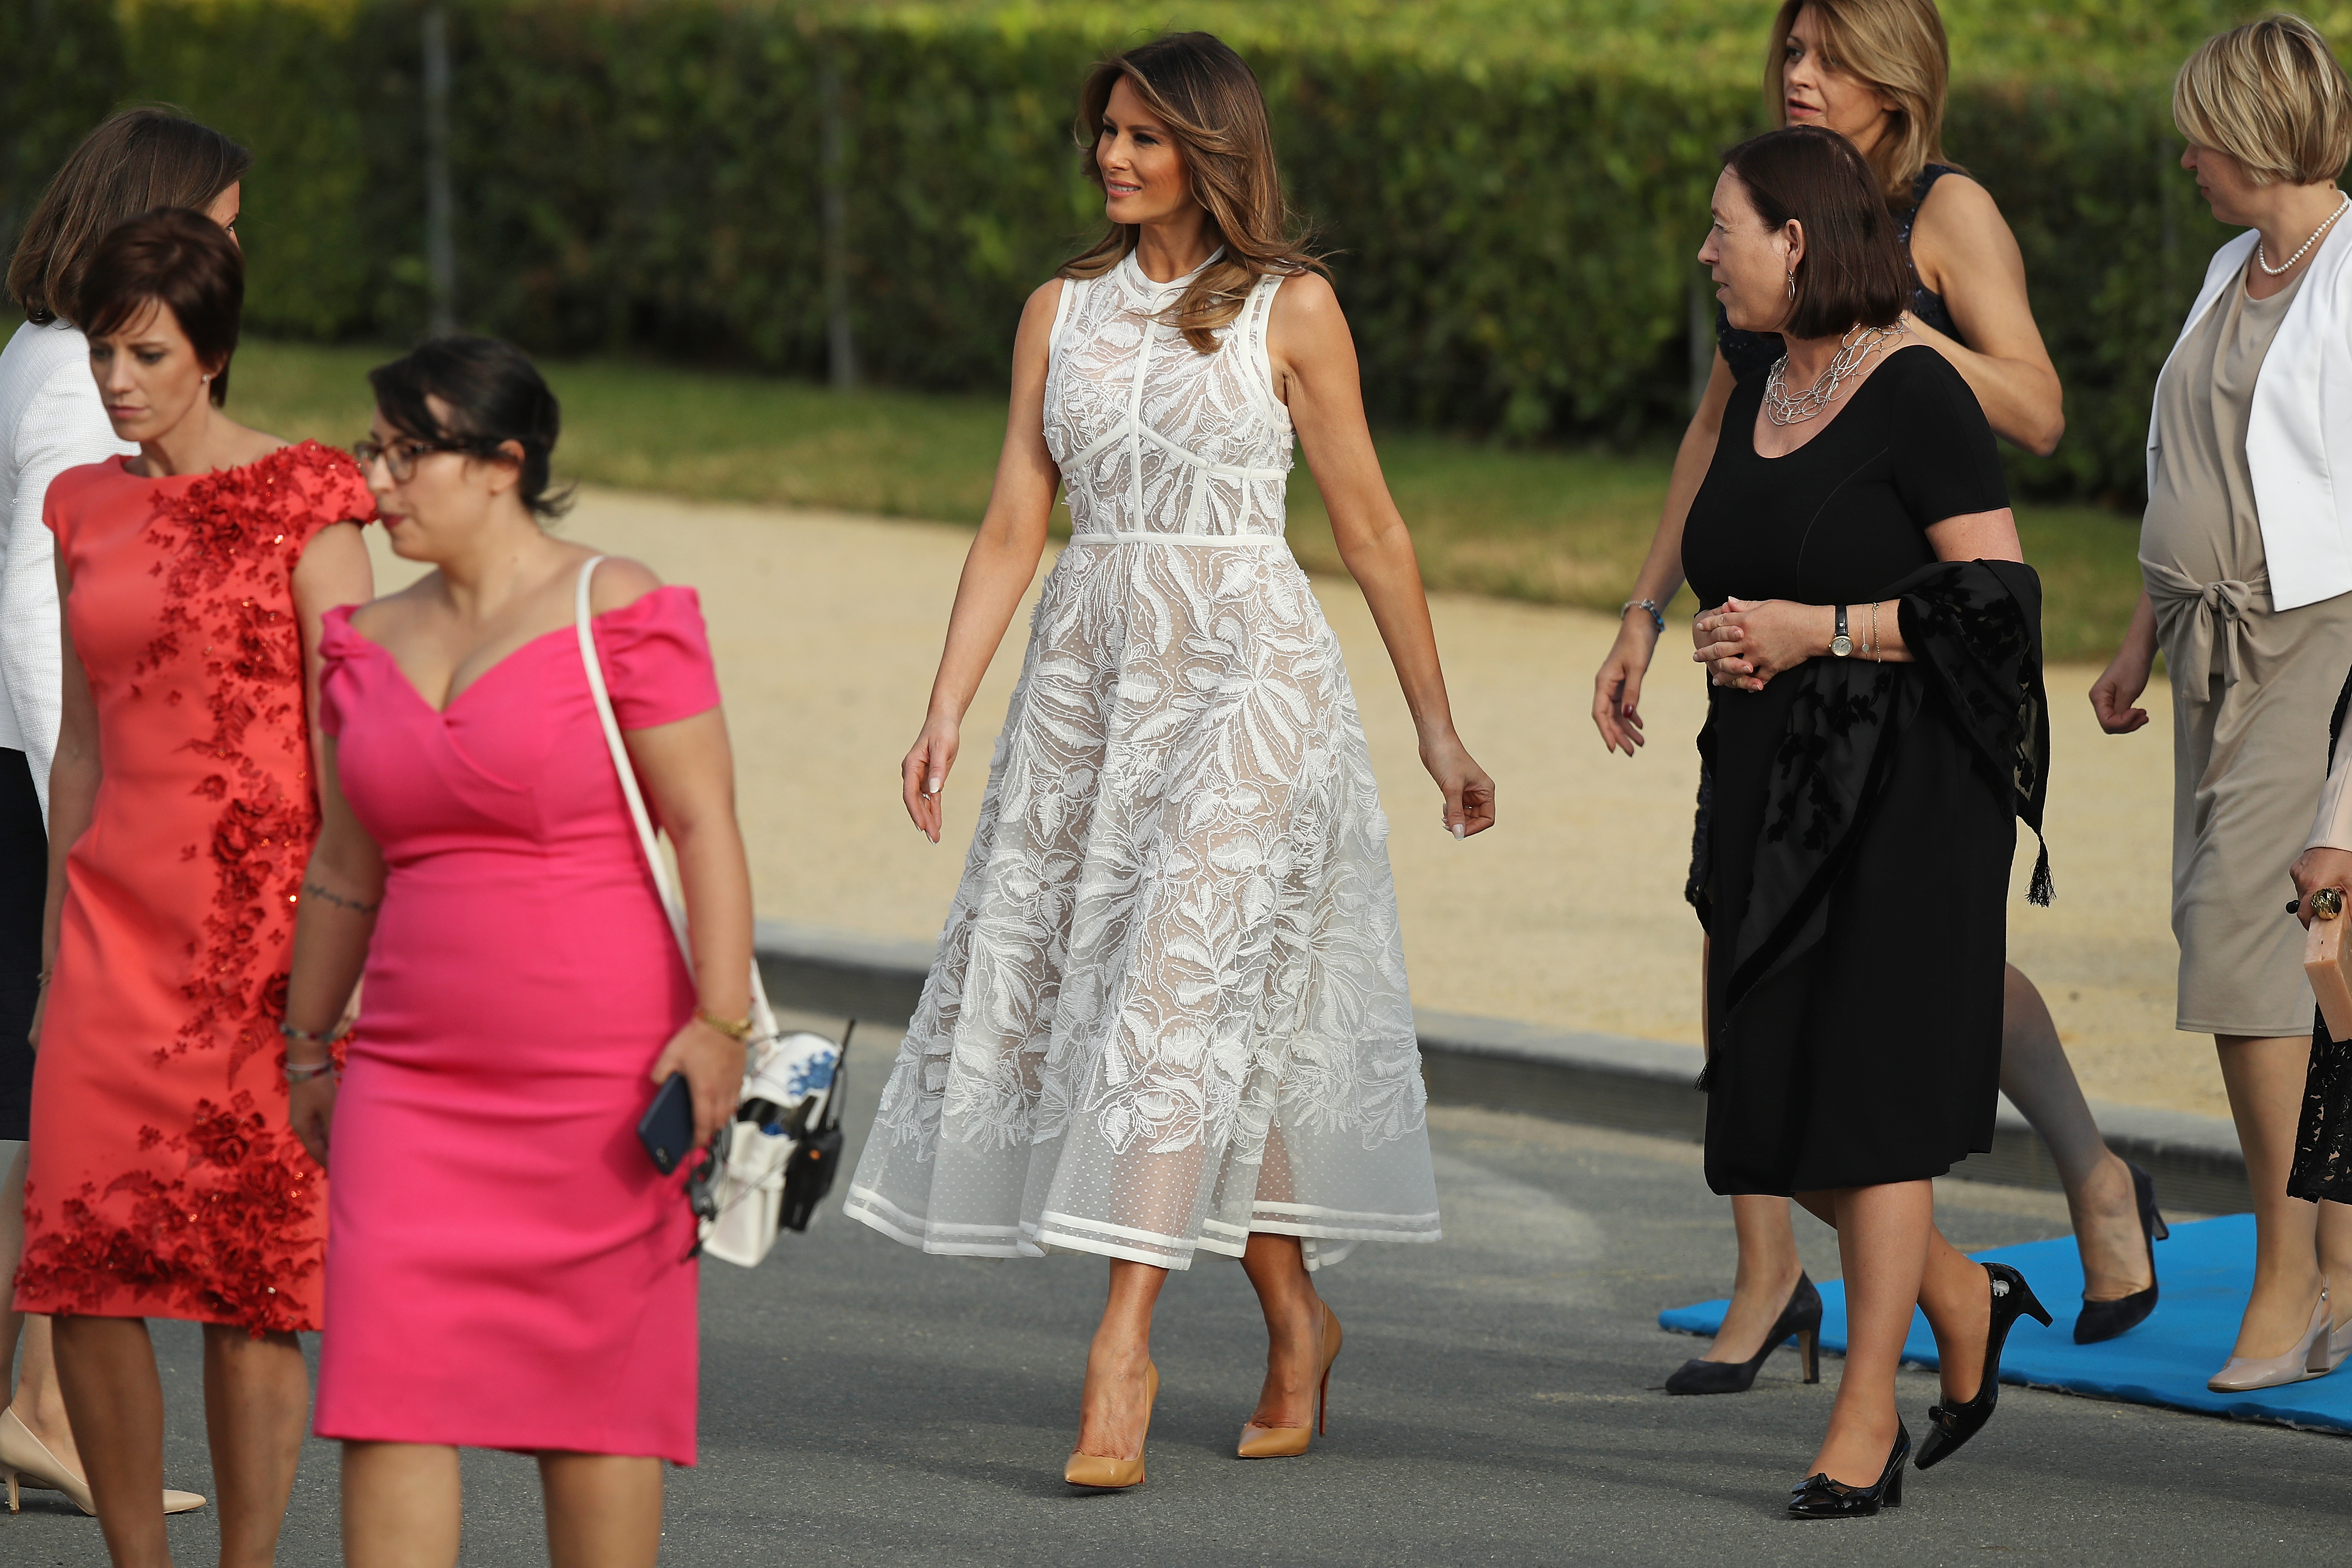 BRUSSELS, BELGIUM - JULY 11: U.S. First Lady Melania Trump (C) and other spouses of heads of state and governments attend the evening reception and dinner at the 2018 NATO Summit on July 11, 2018 in Brussels, Belgium. Leaders from NATO member and partner states are meeting for a two-day summit, which is being overshadowed by strong demands by U.S. President Trump for most NATO member countries to spend more on defense. (Photo by Sean Gallup/Getty Images)